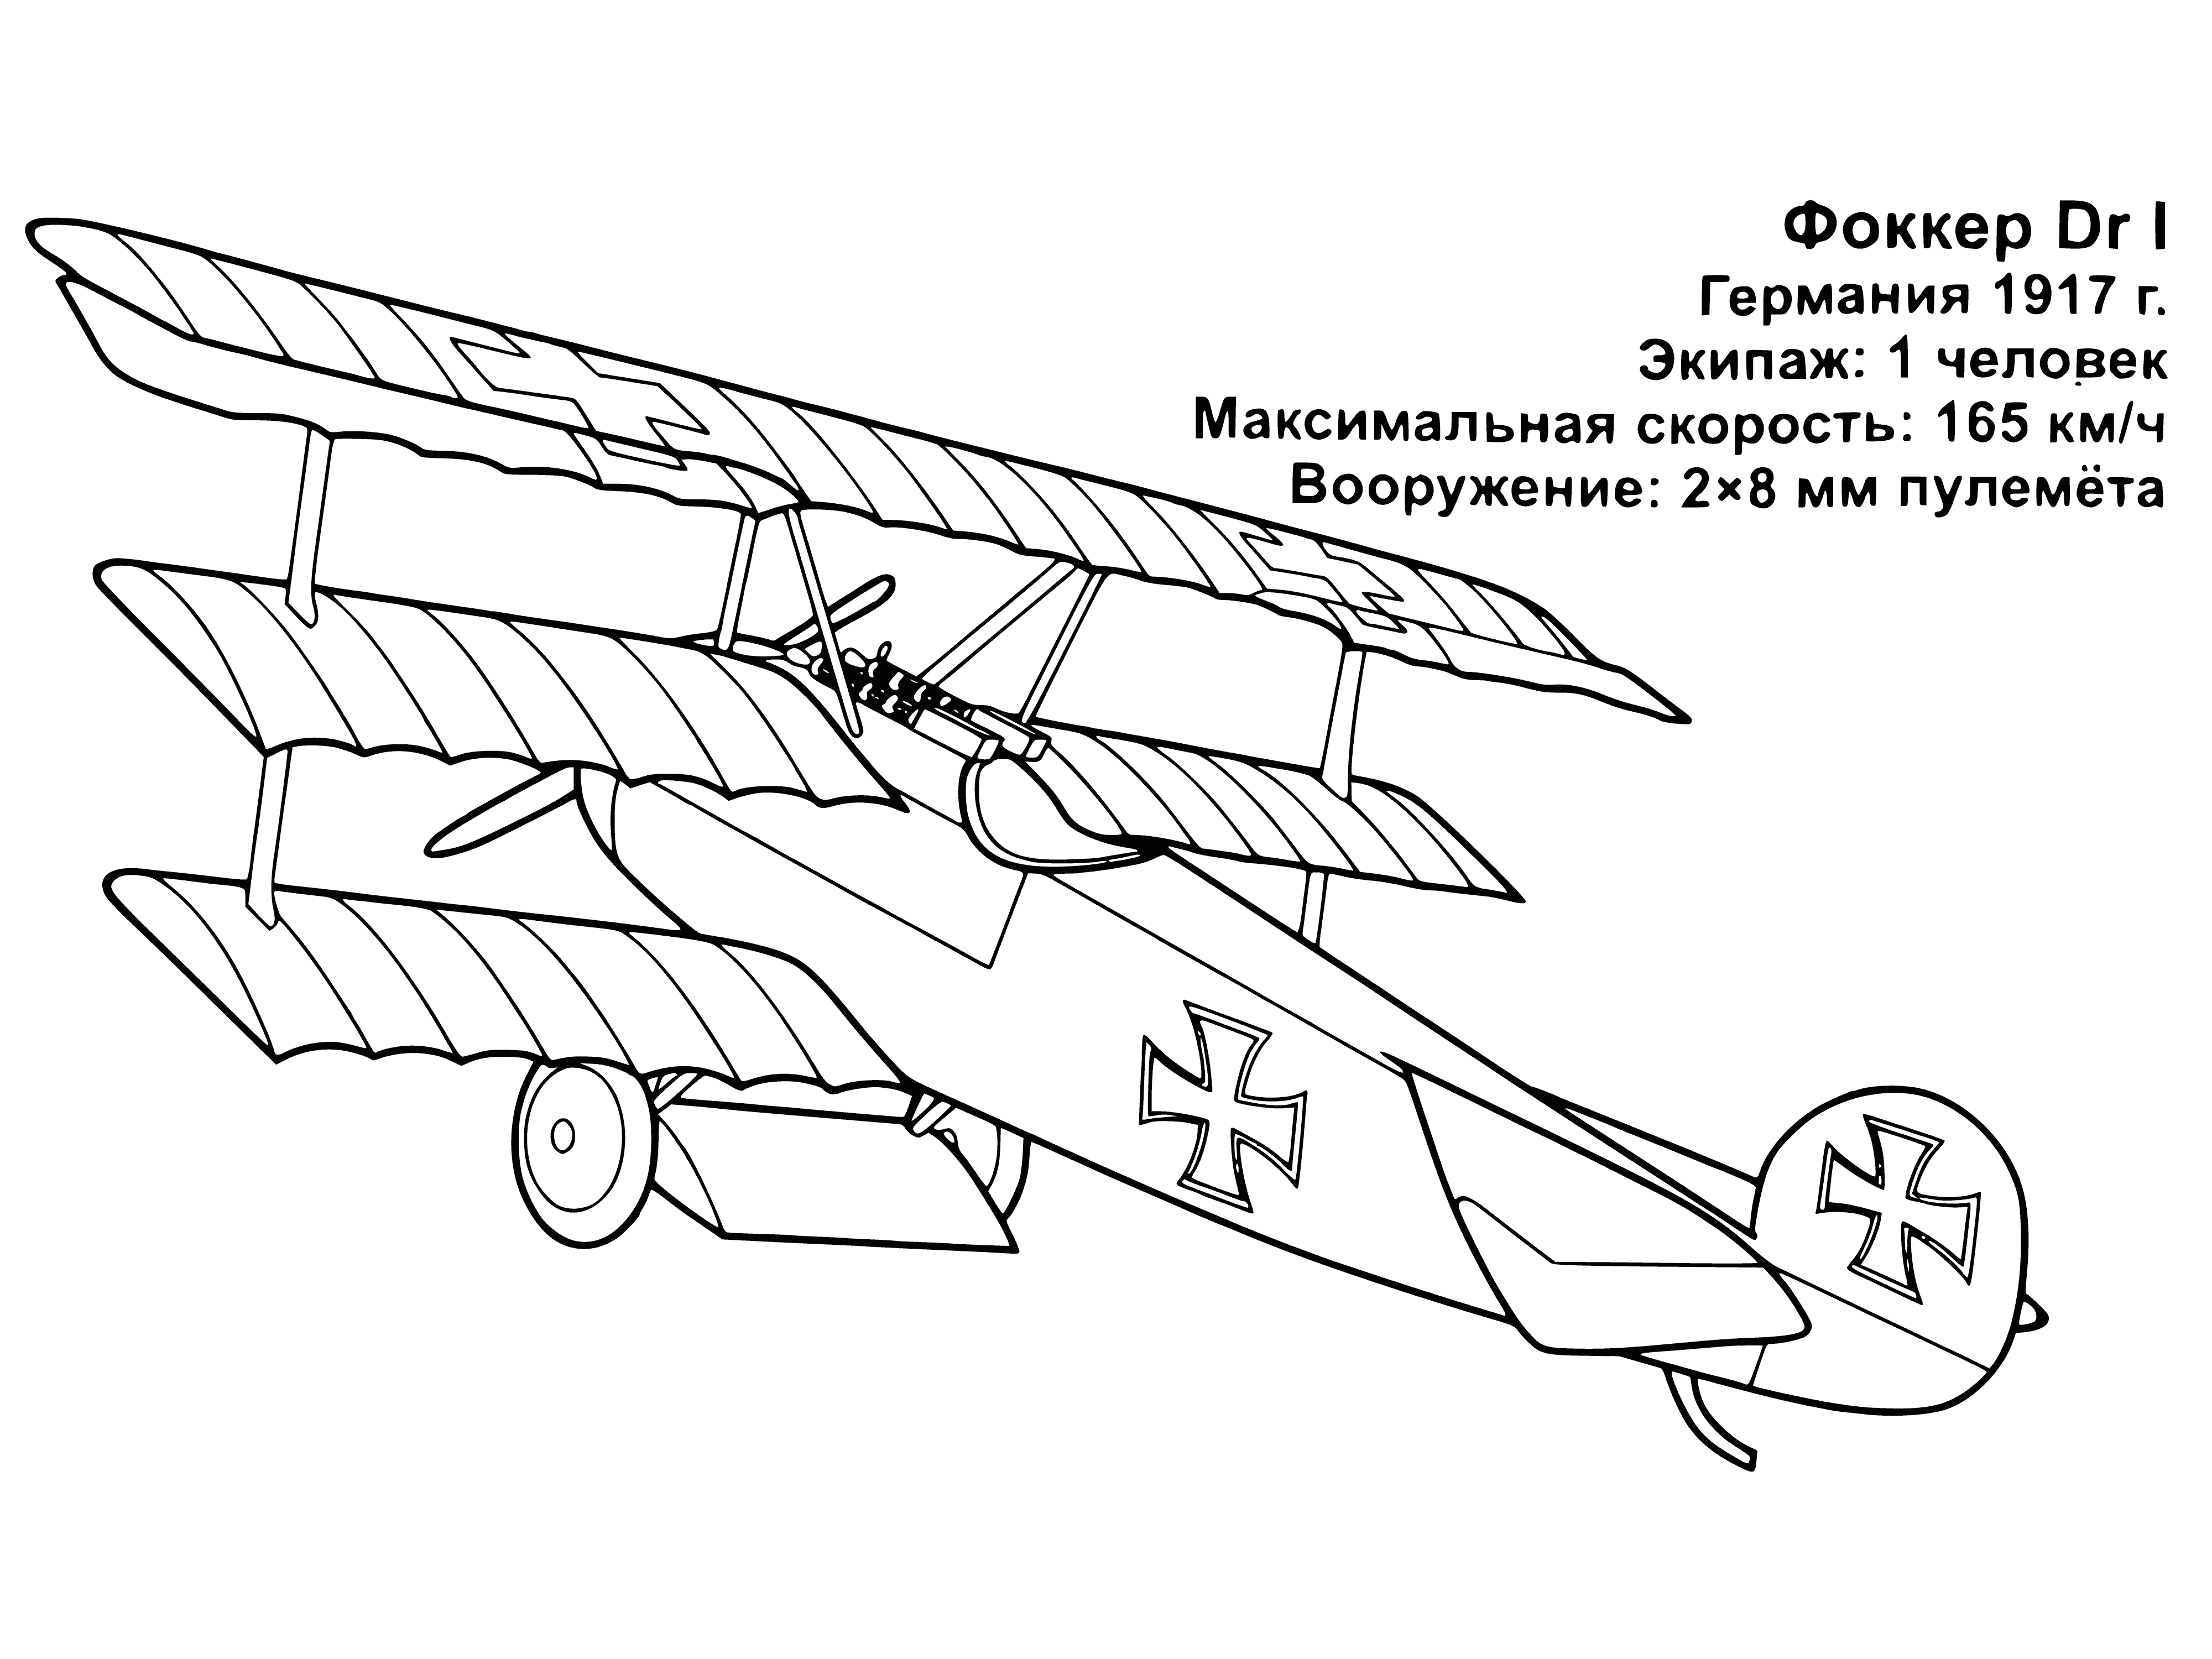 German aircraft of 1917 coloring page